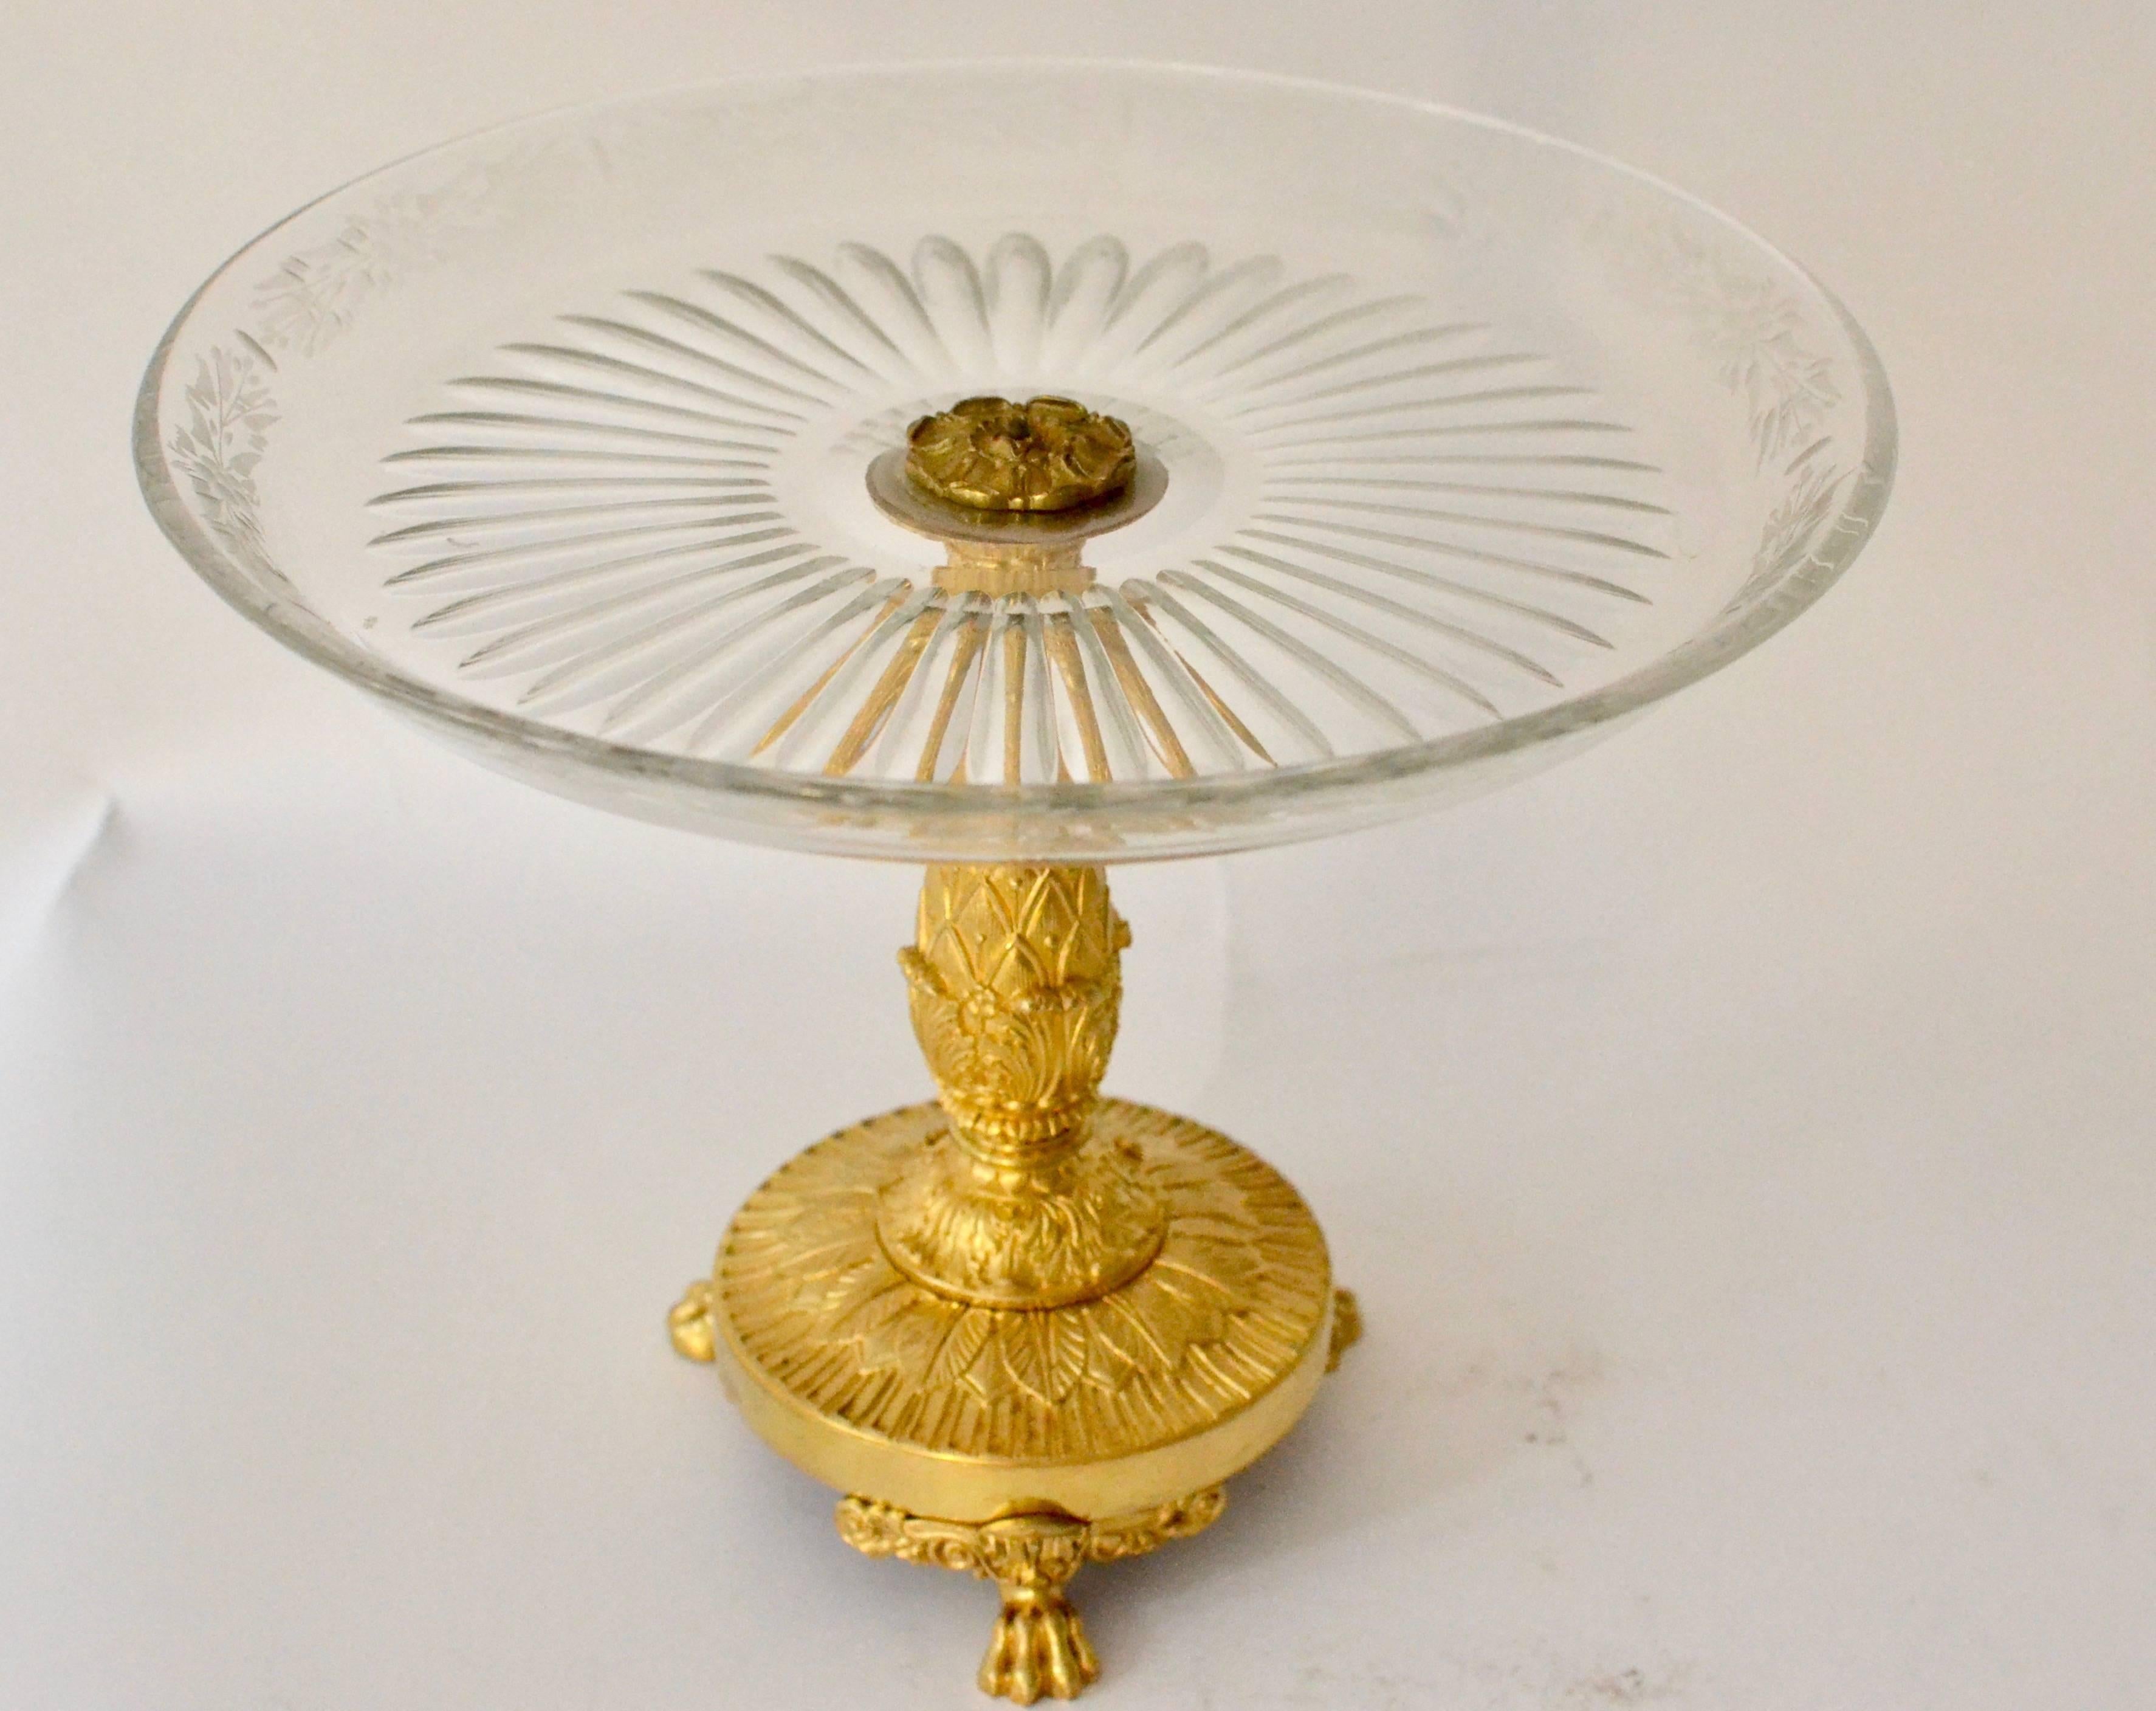 French Pair of Empire Gilt Bronze and Cut Glass Empire Tazzas, Surtout De Table